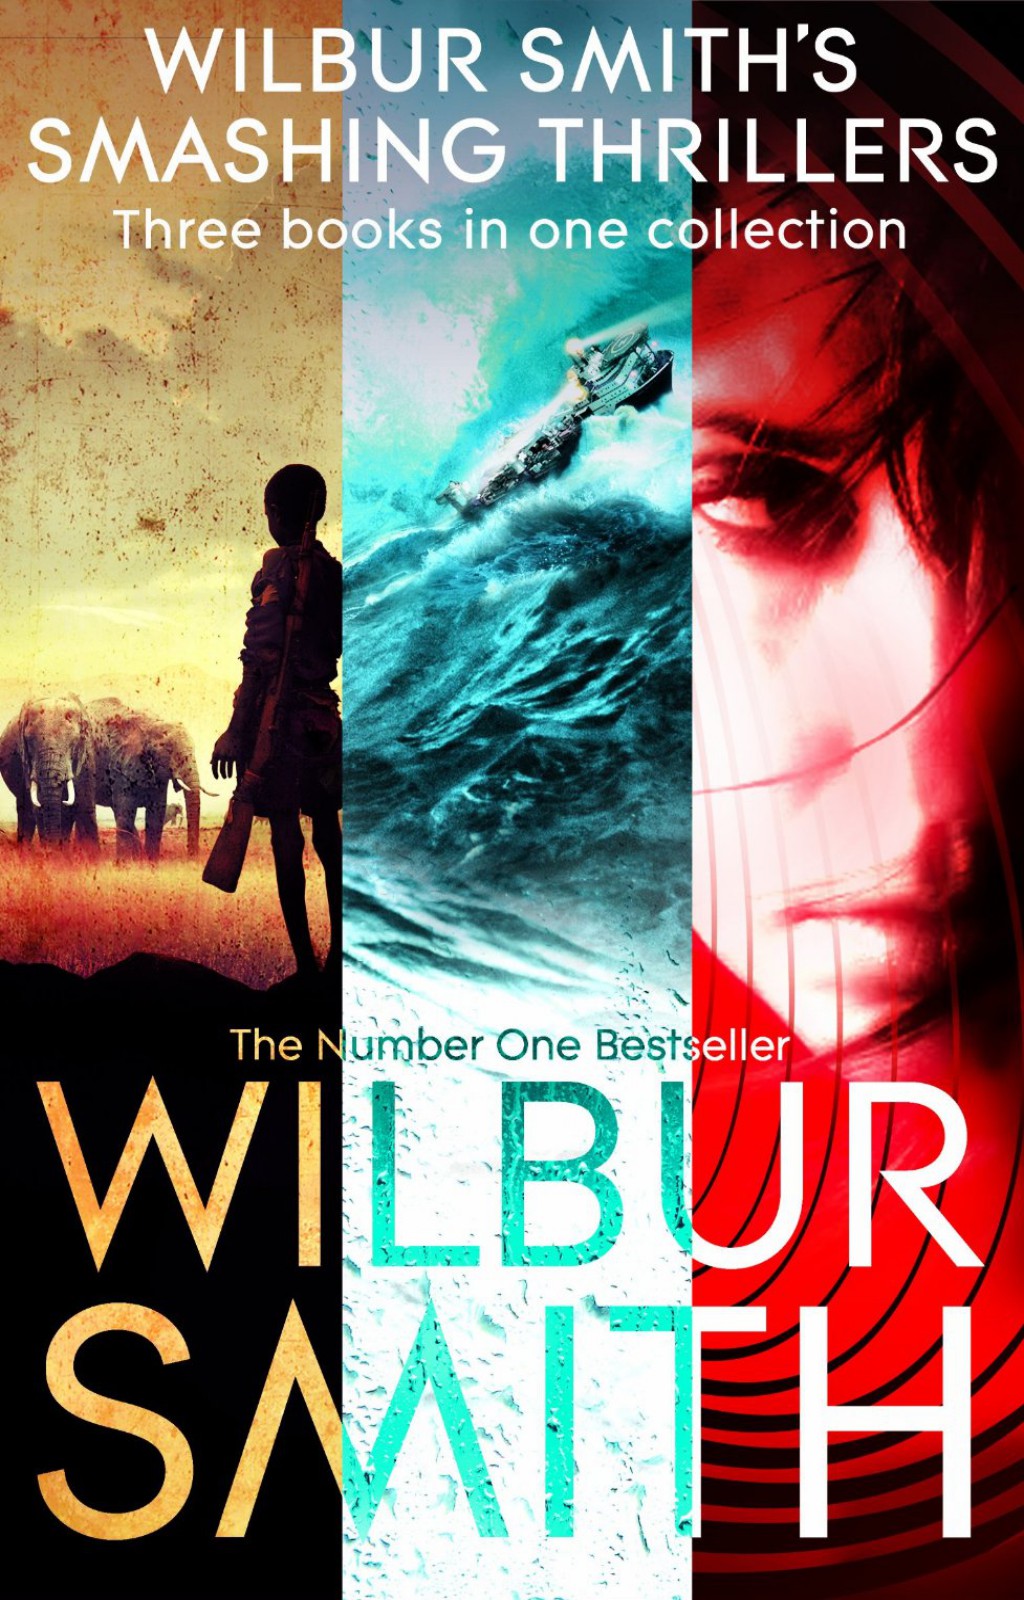 Wilbur Smith's Smashing Thrillers by Wilbur Smith